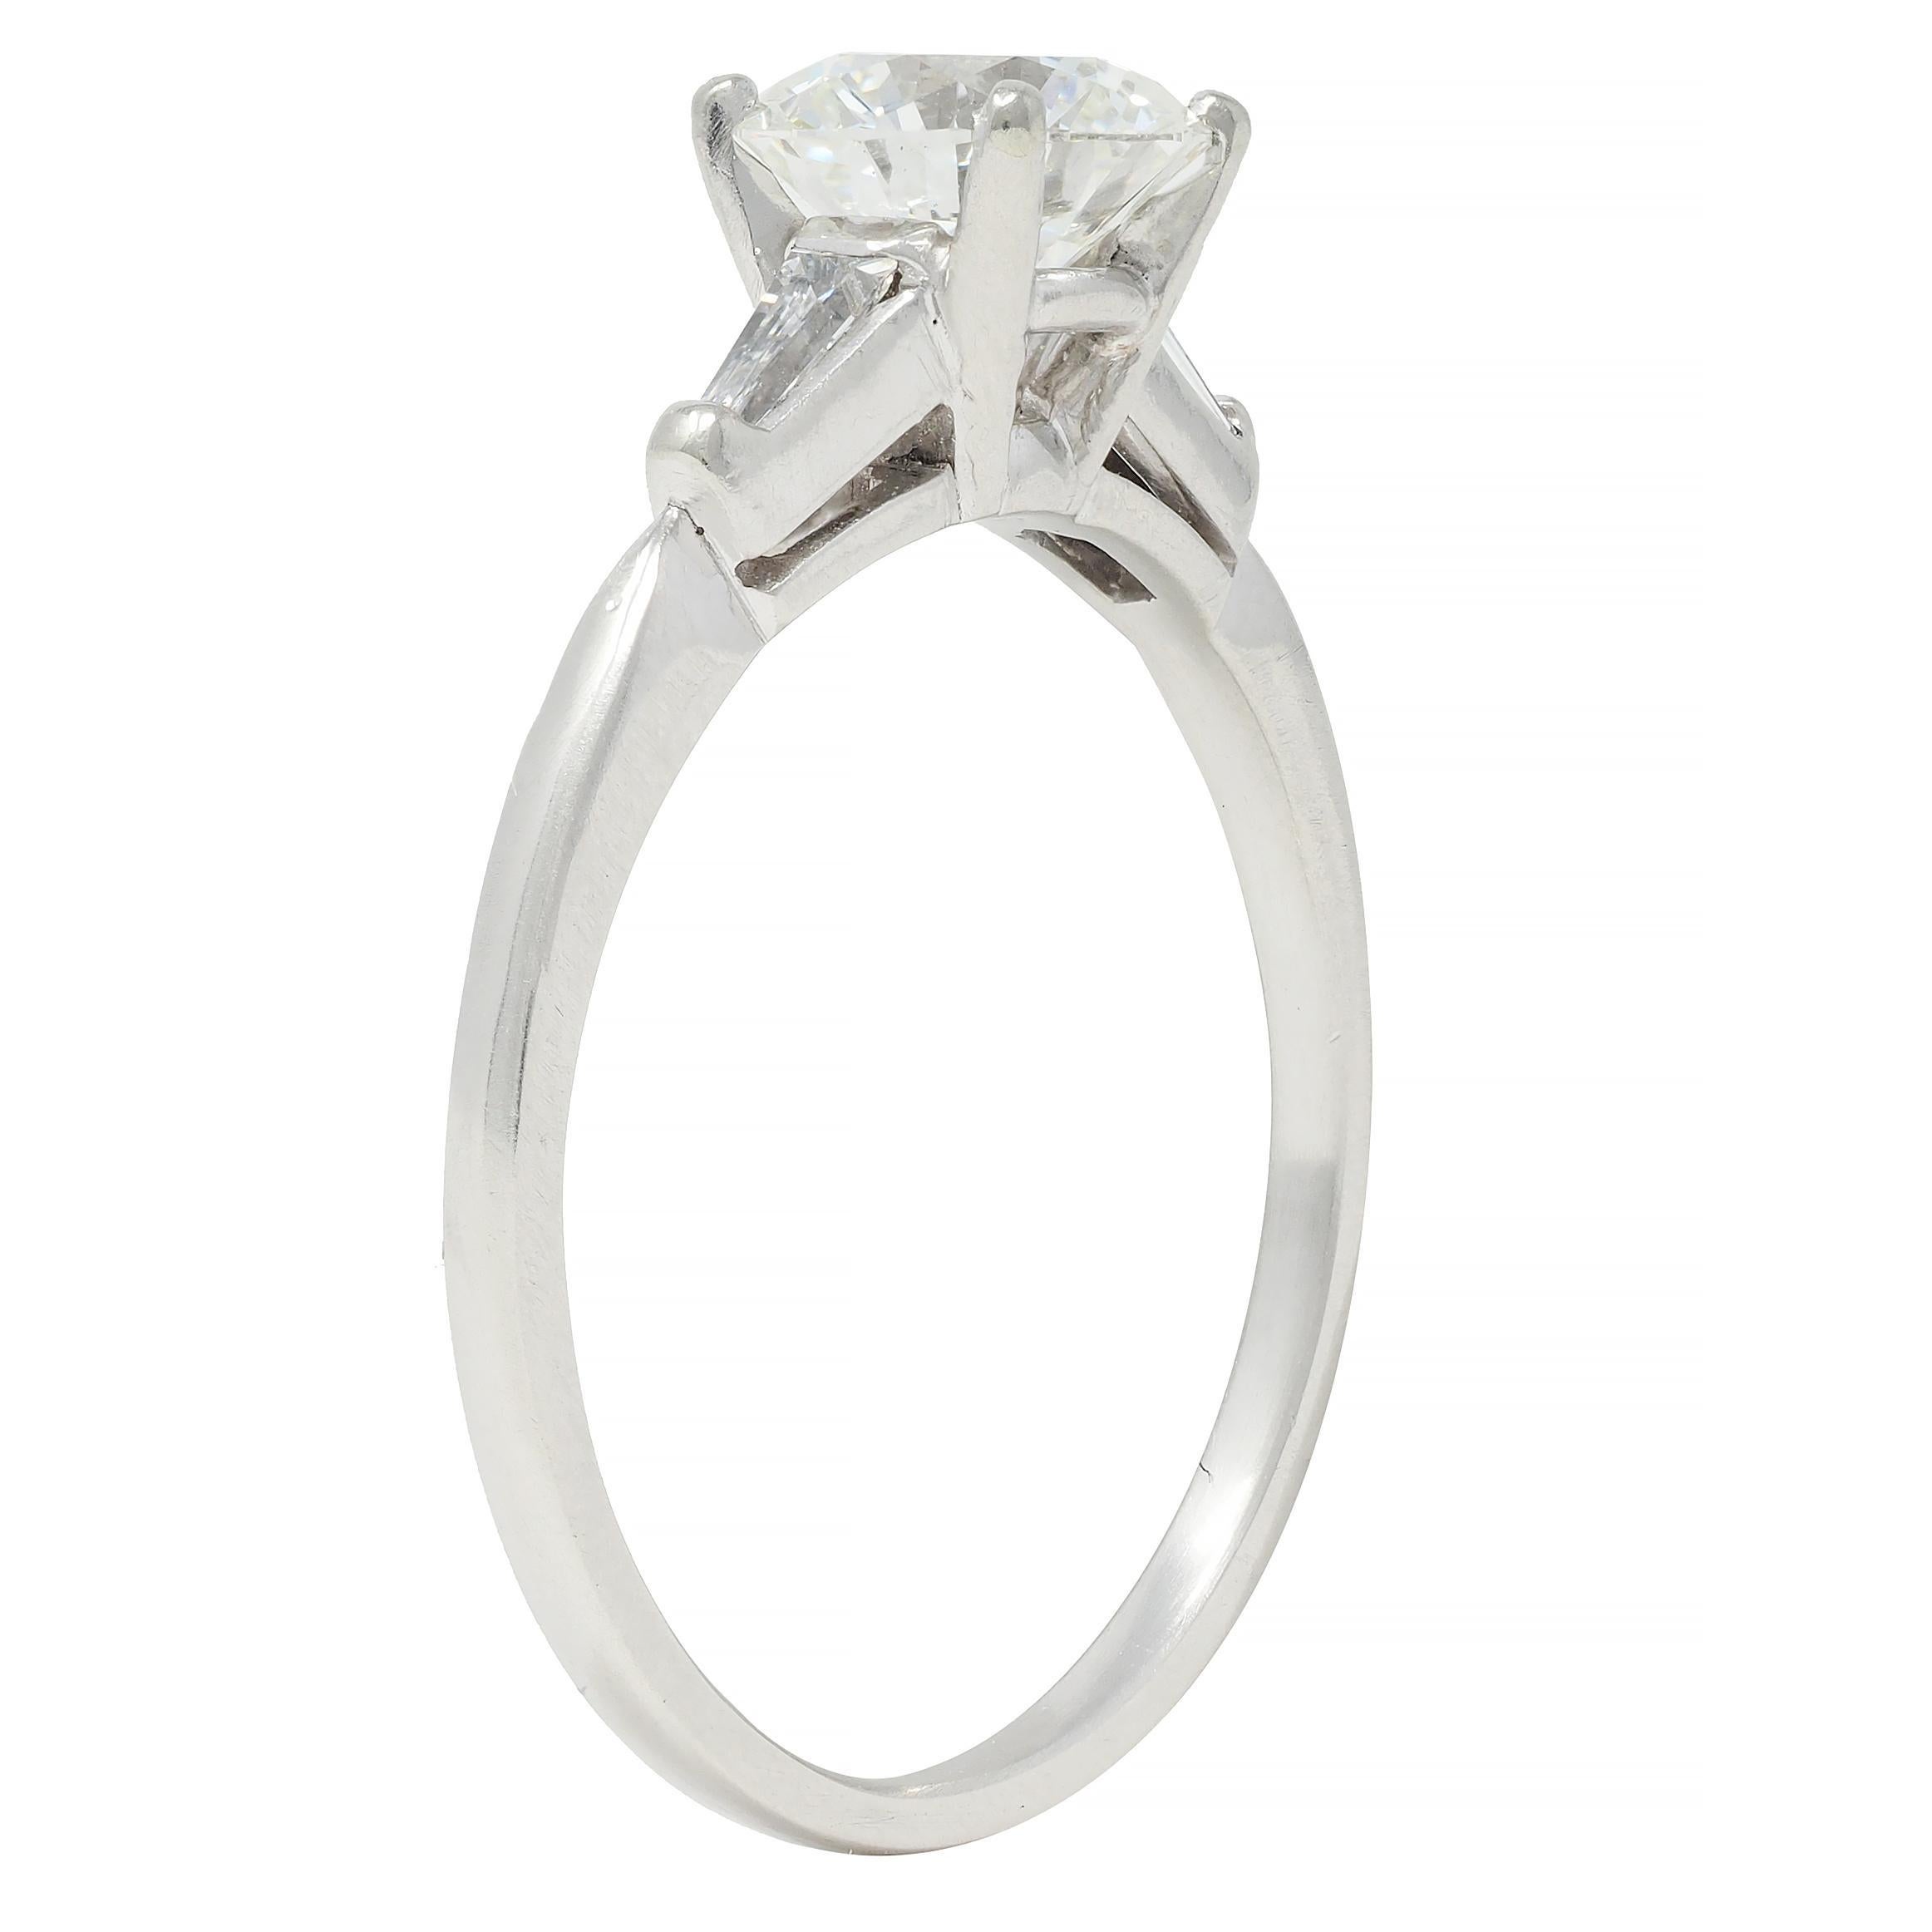 Centering a transitional cut diamond weighing approximately 1.04 carats - H color with VS2 clarity
Prong set in basket and flanked by cathedral shoulders bar set with baguette cut diamonds
Weighing approximately 0.18 carat total - eye clean and